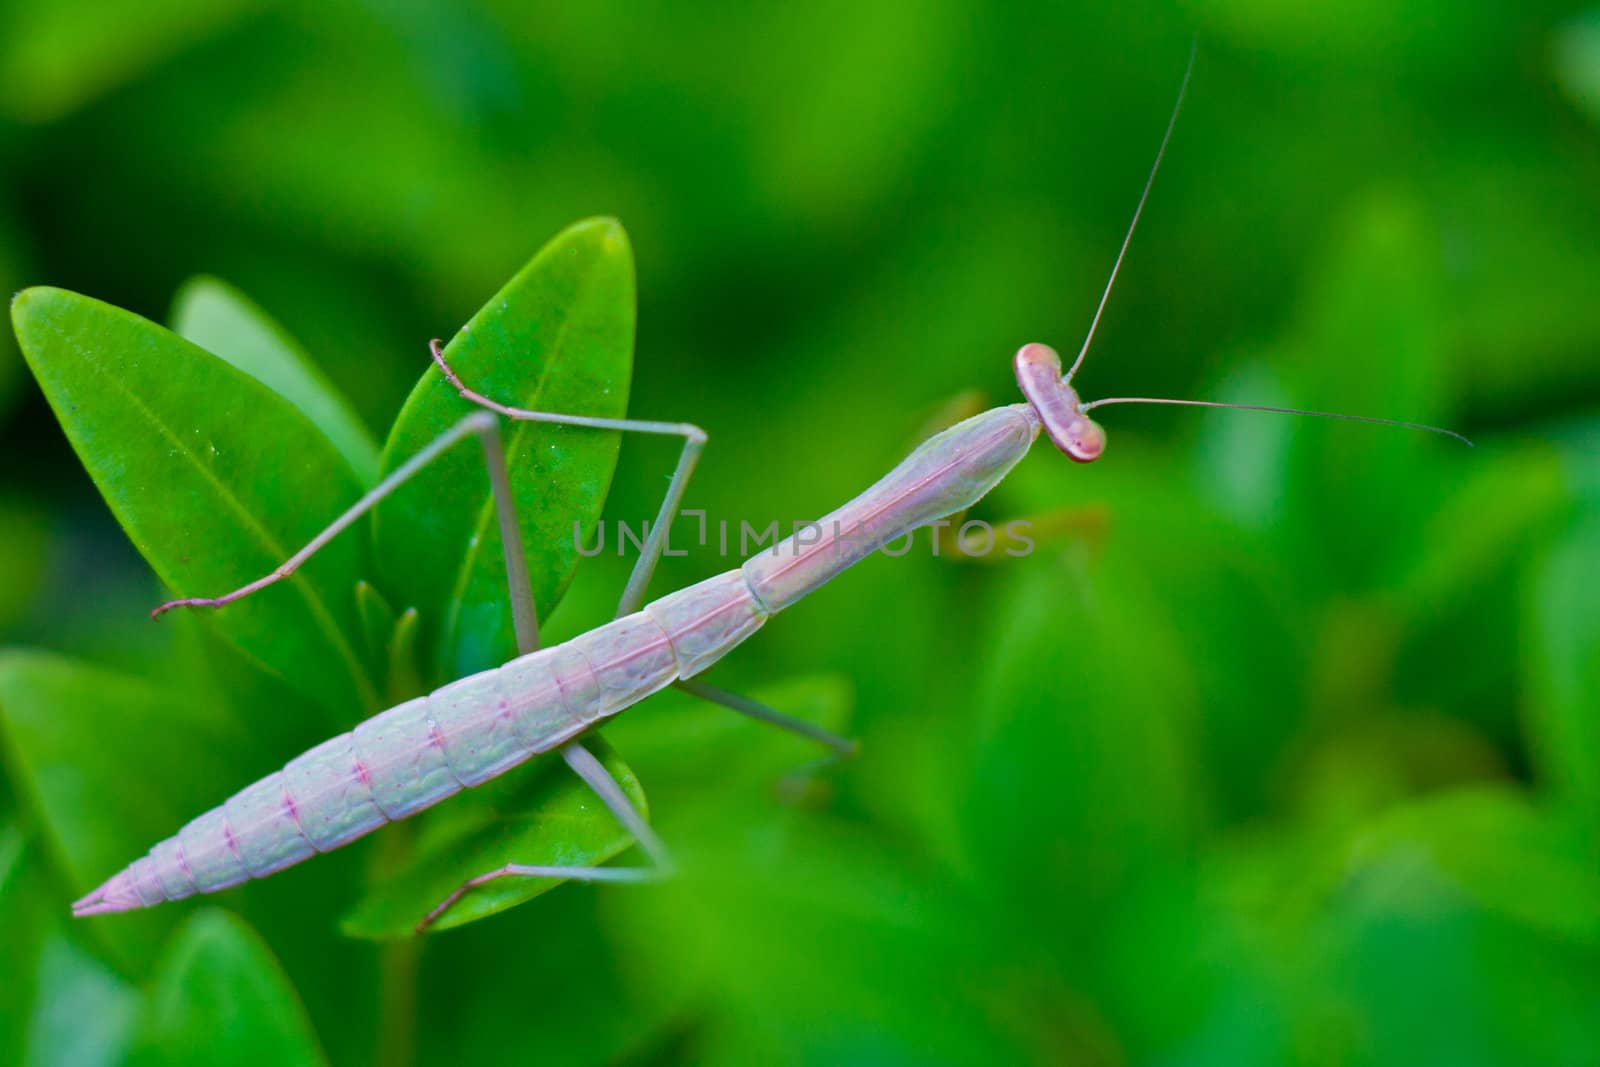 Praying Mantis Insect by rothphotosc